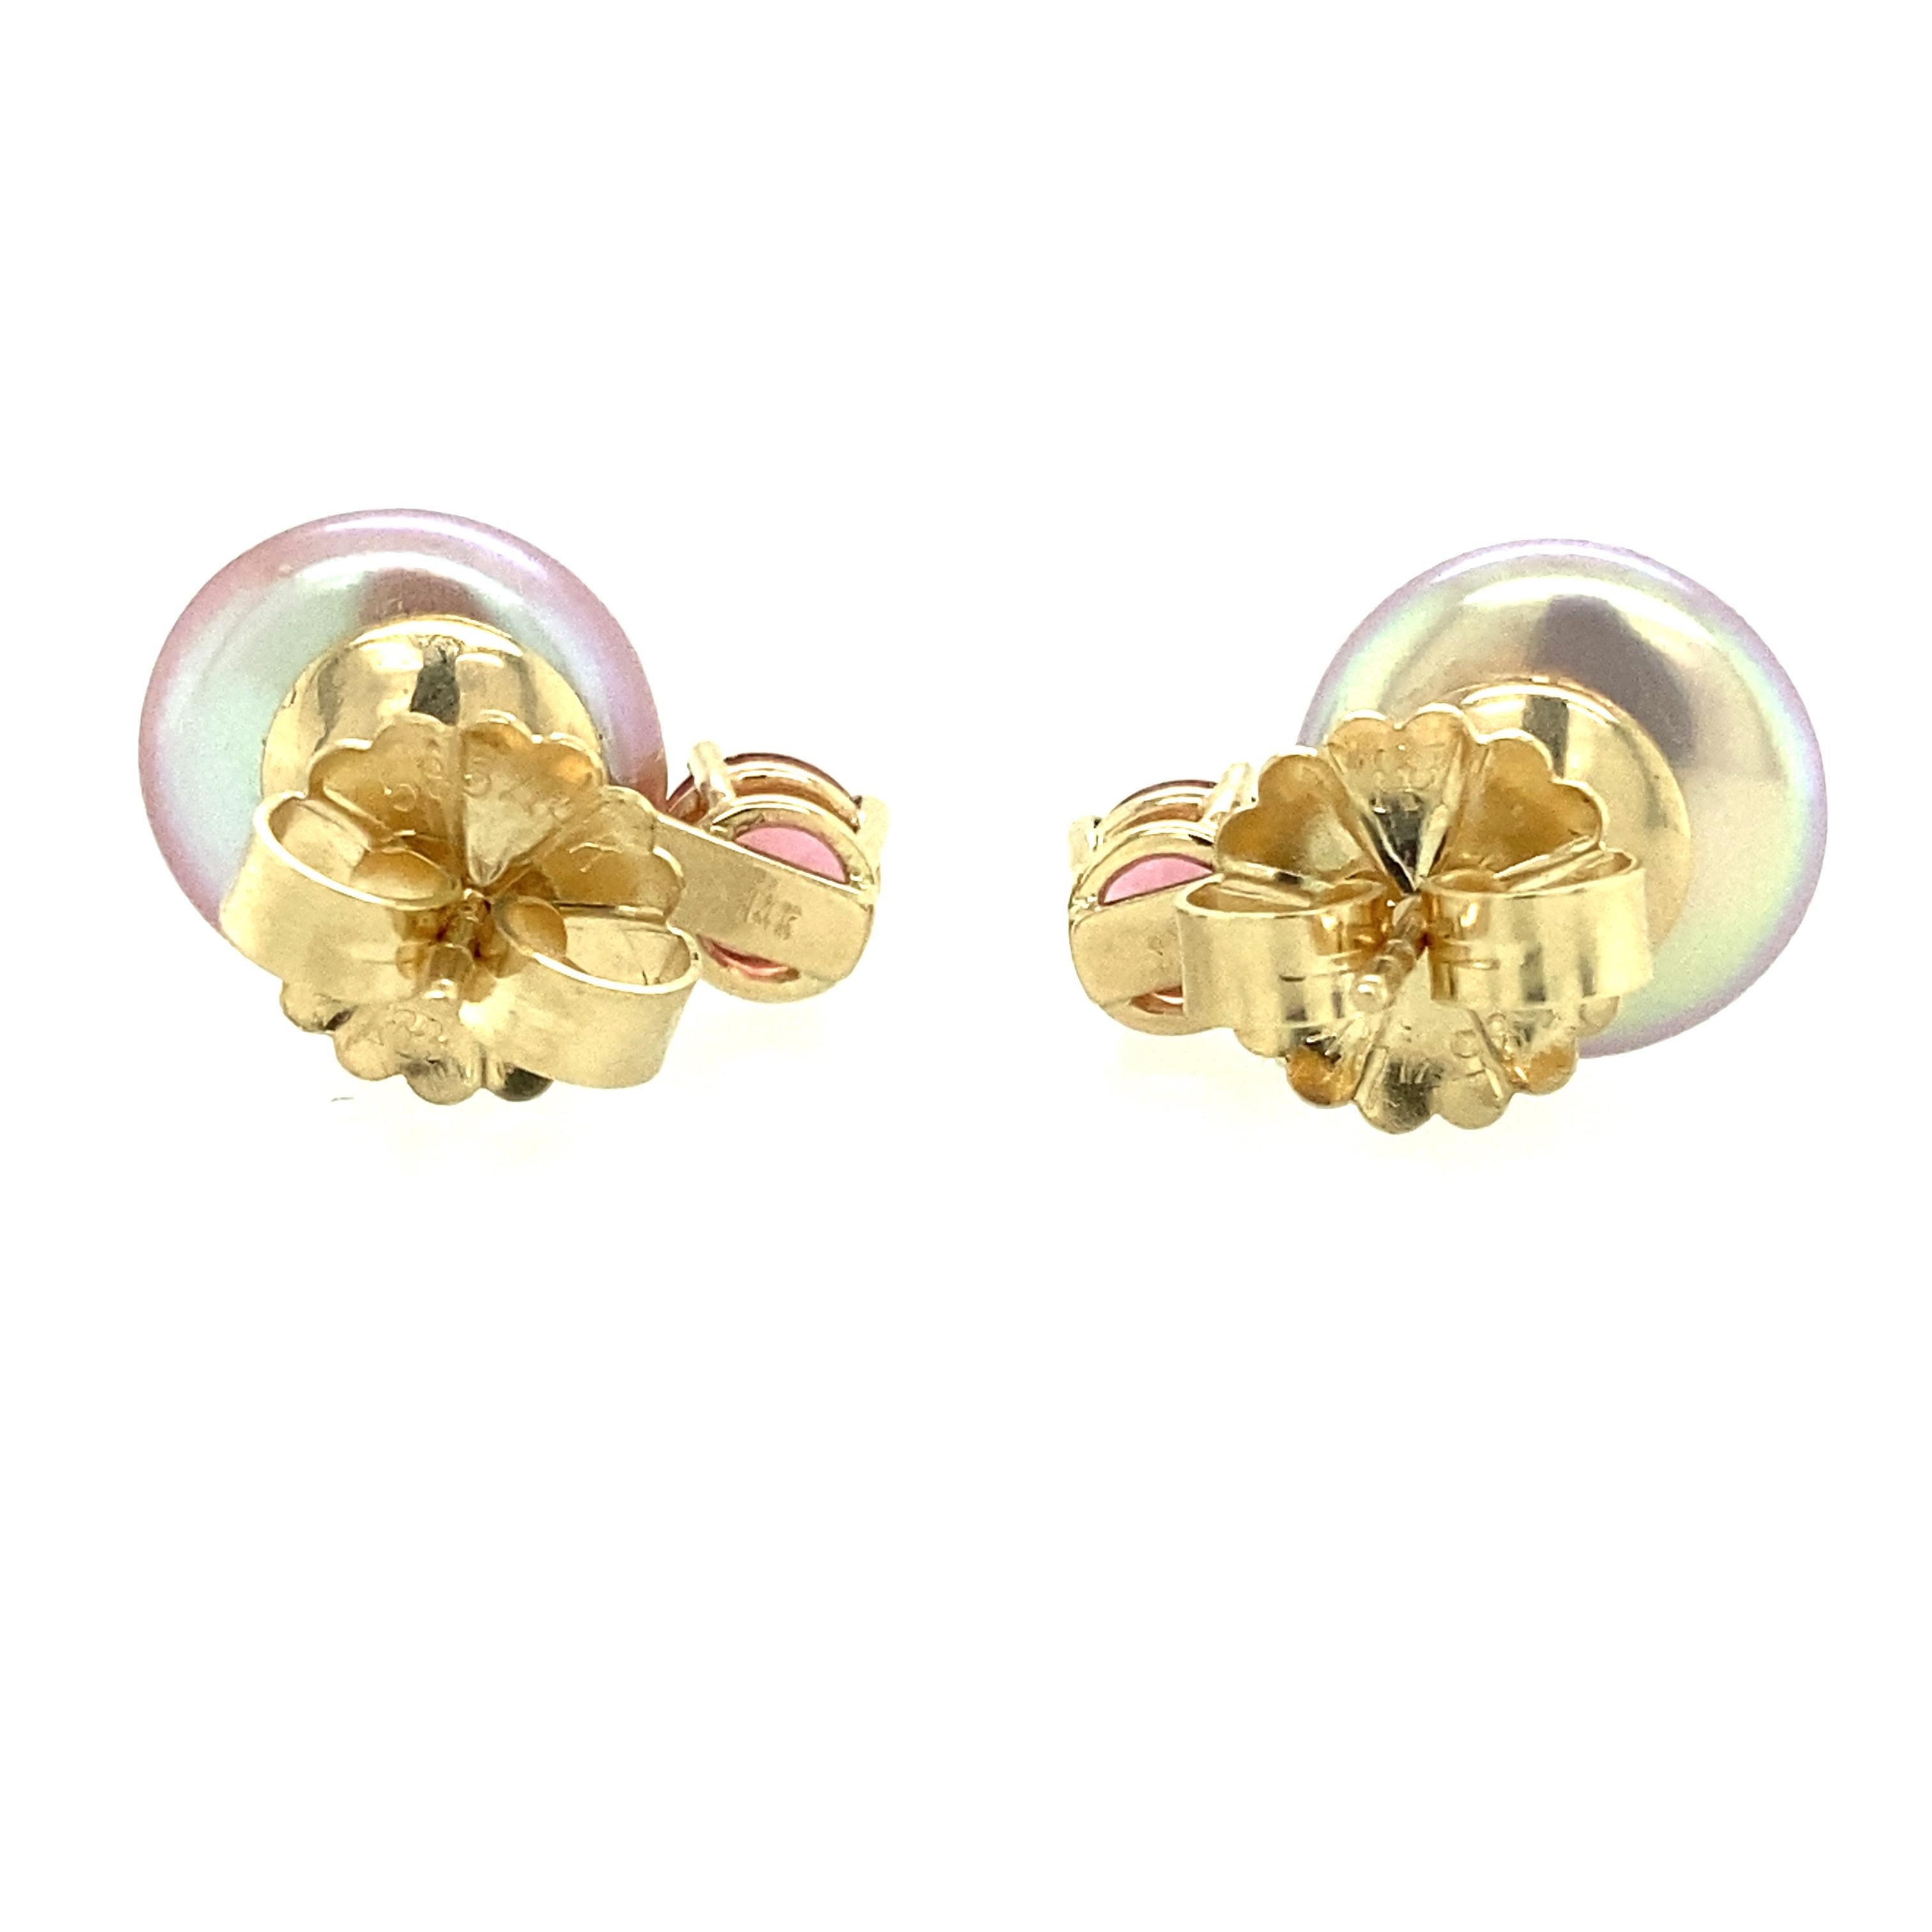 One pair of 14 karat yellow gold (stamped 14K) estate drop earrings each set with one 12.3mm pink coin freshwater pearl and one 5.5mm pink tourmaline.  The earrings measure 18.3mm long and are complete with friction posts and backs.